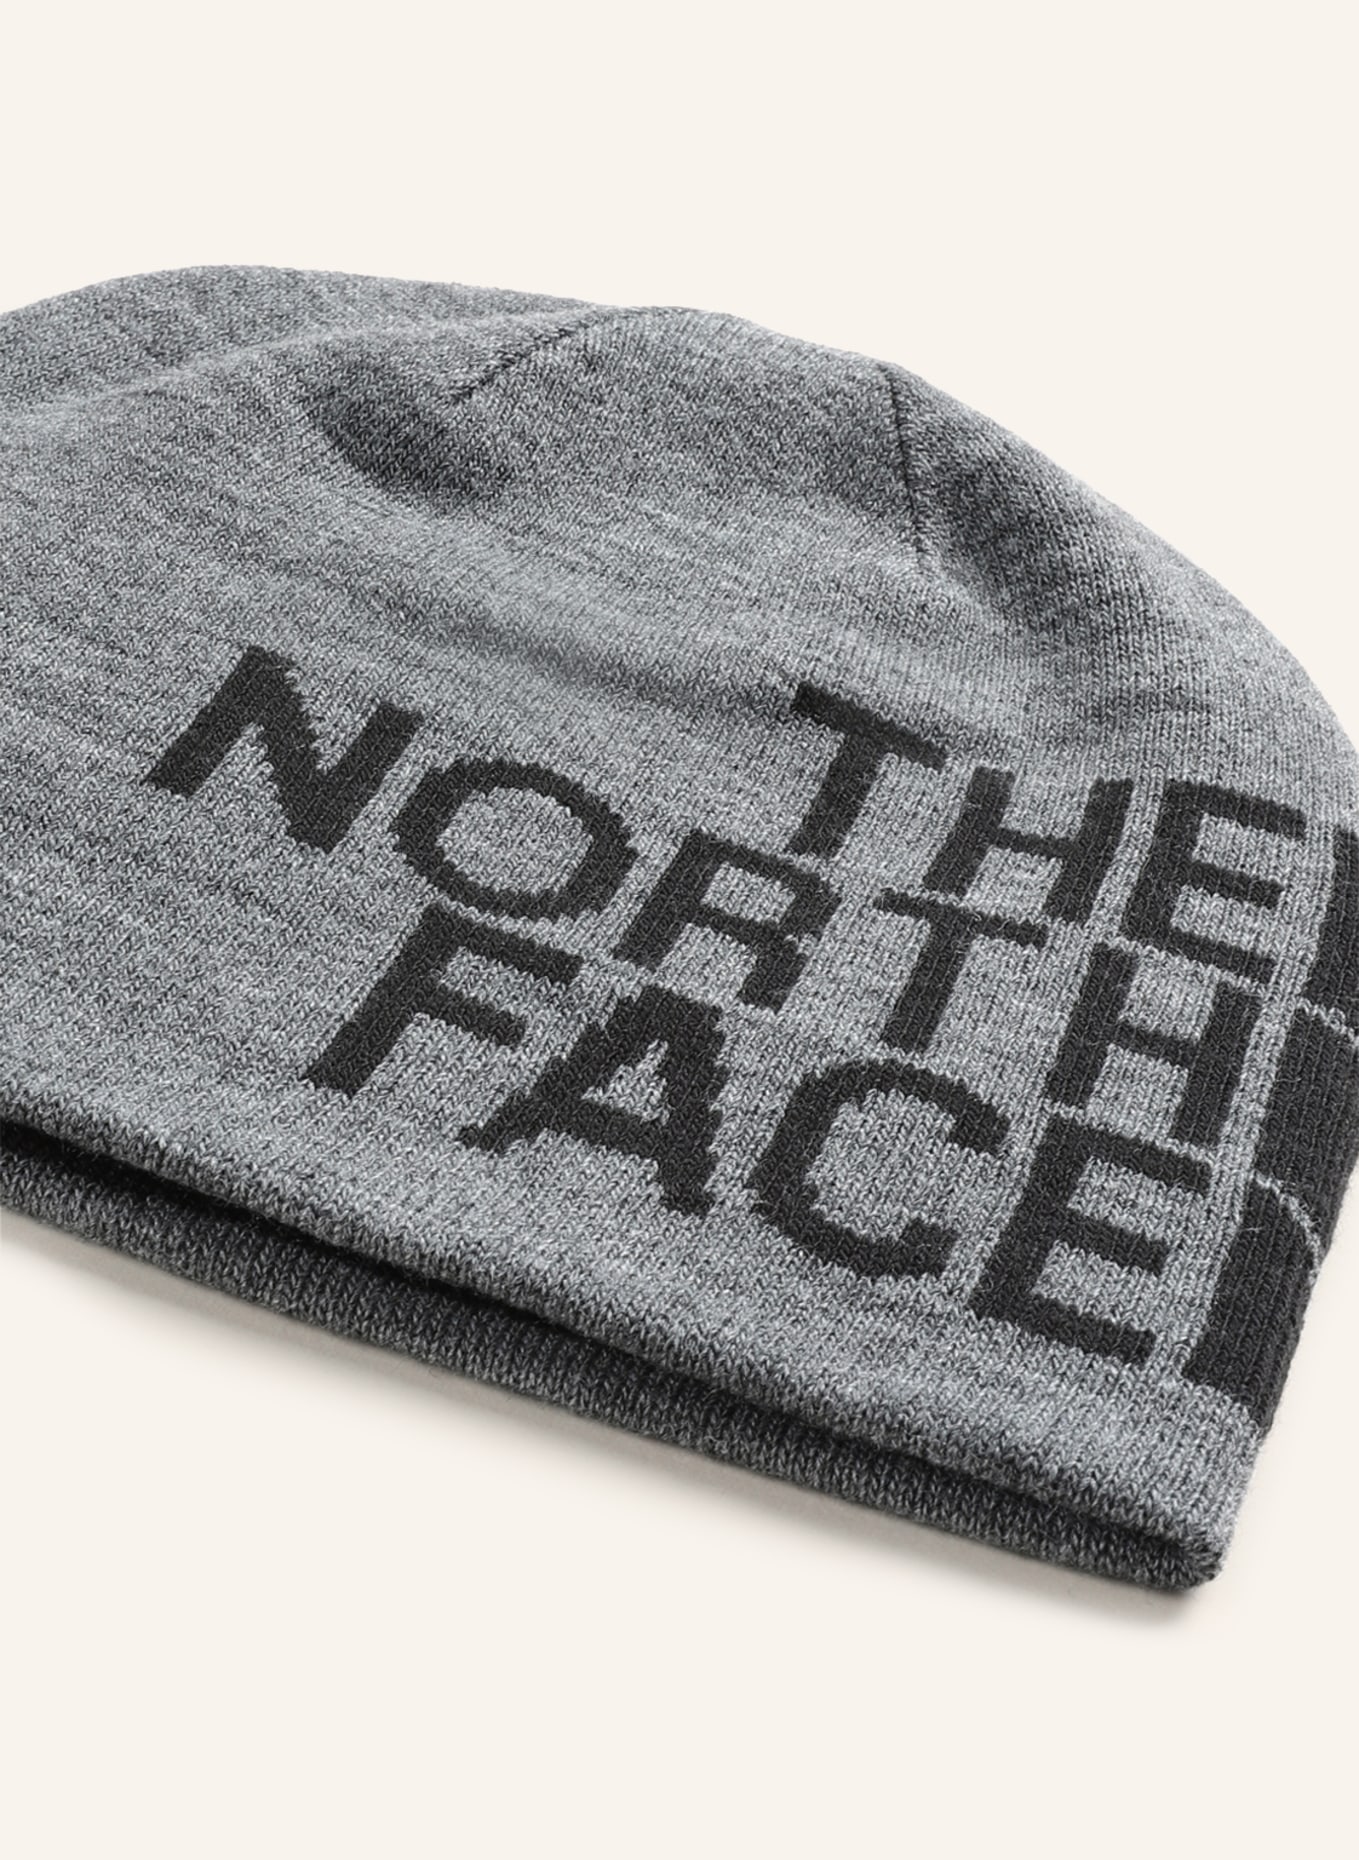 BANNER THE NORTH FACE gray in TNF reversible Beanie